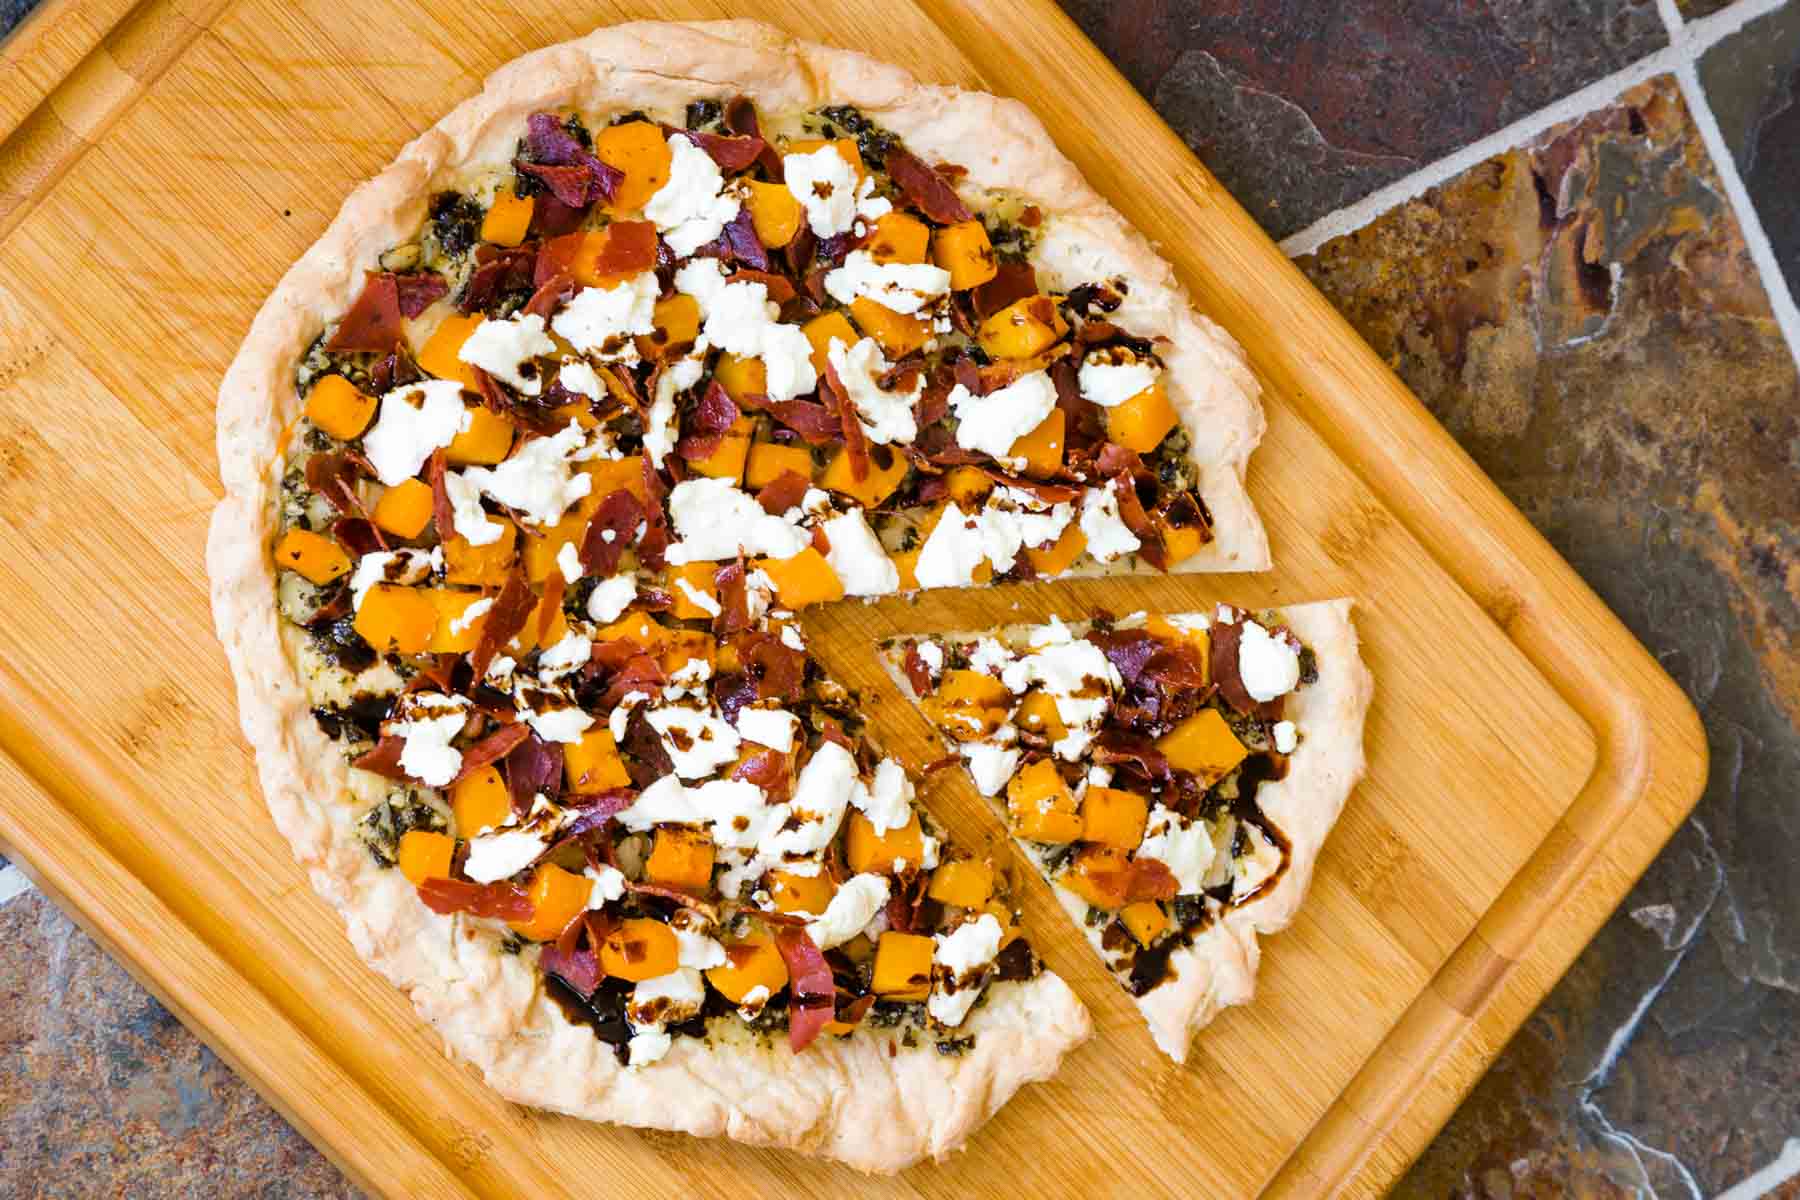 A whole gluten free pizza with butternut squash on a cutting board with one slice cut and pulled away slightly.